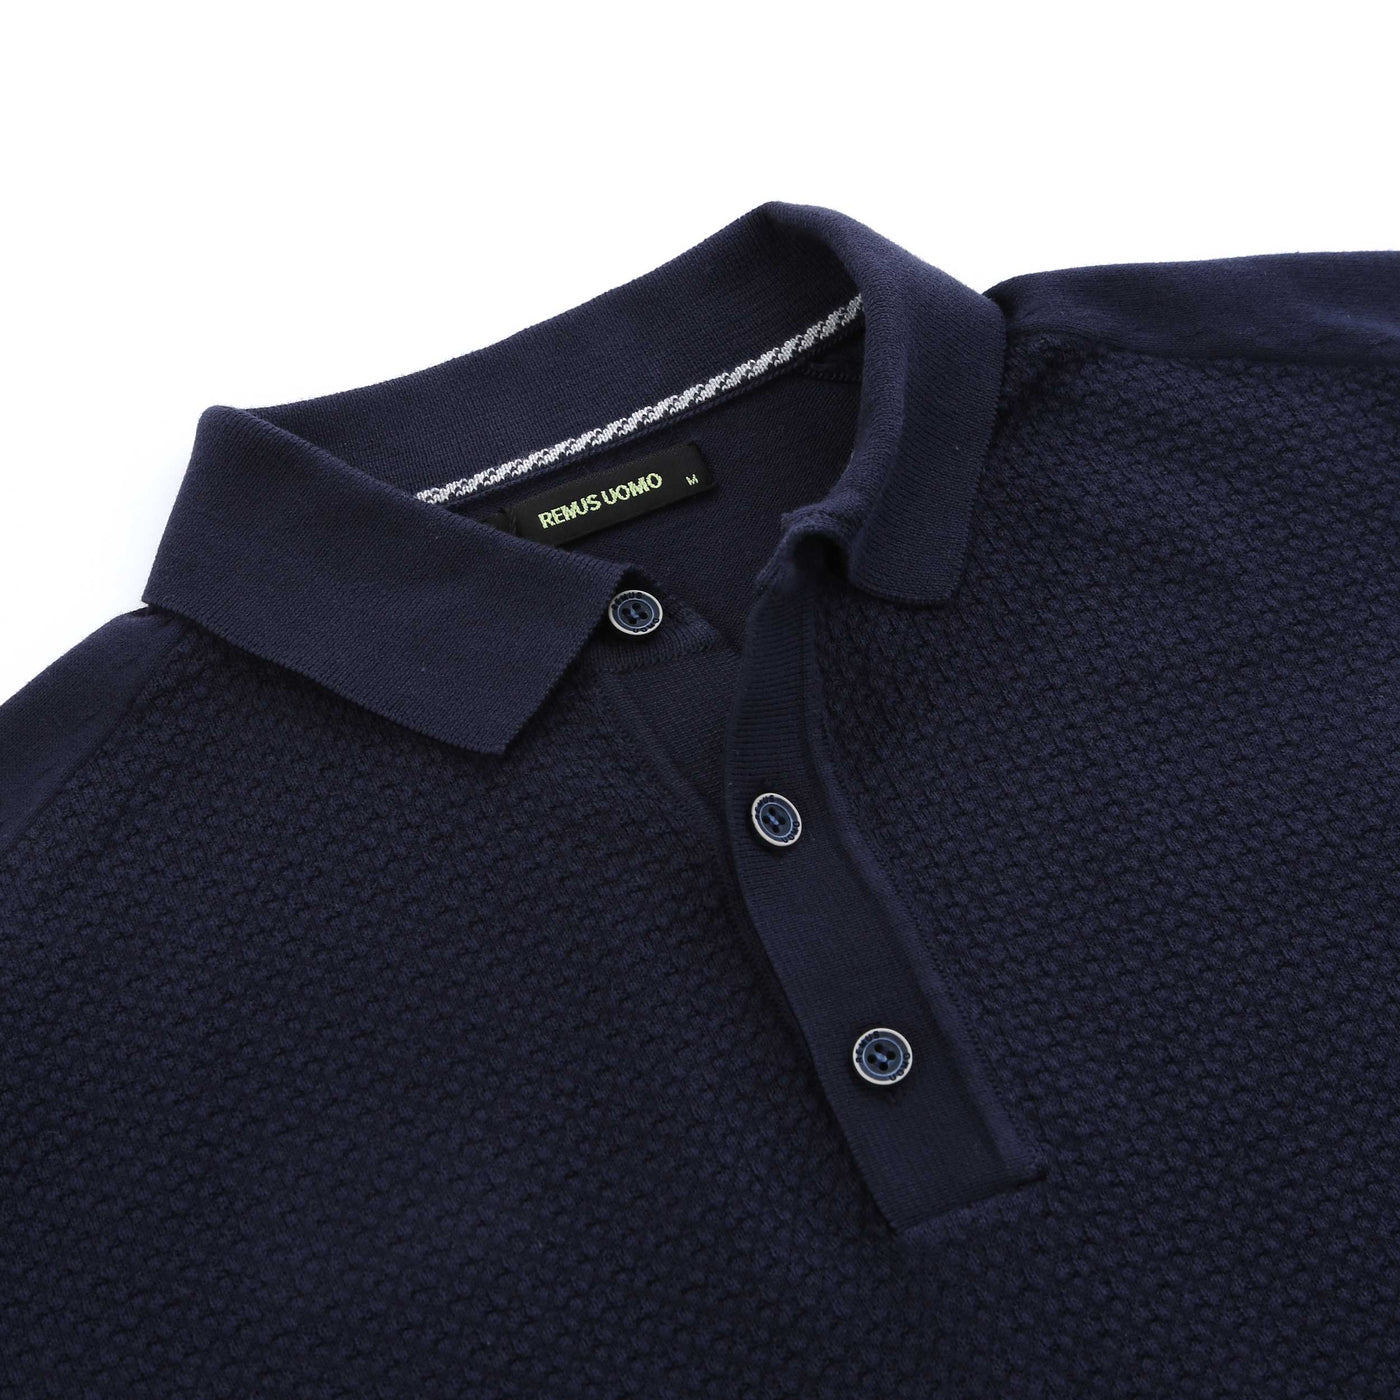 Remus Uomo Waffle Knitted Polo Shirt in Navy Collar